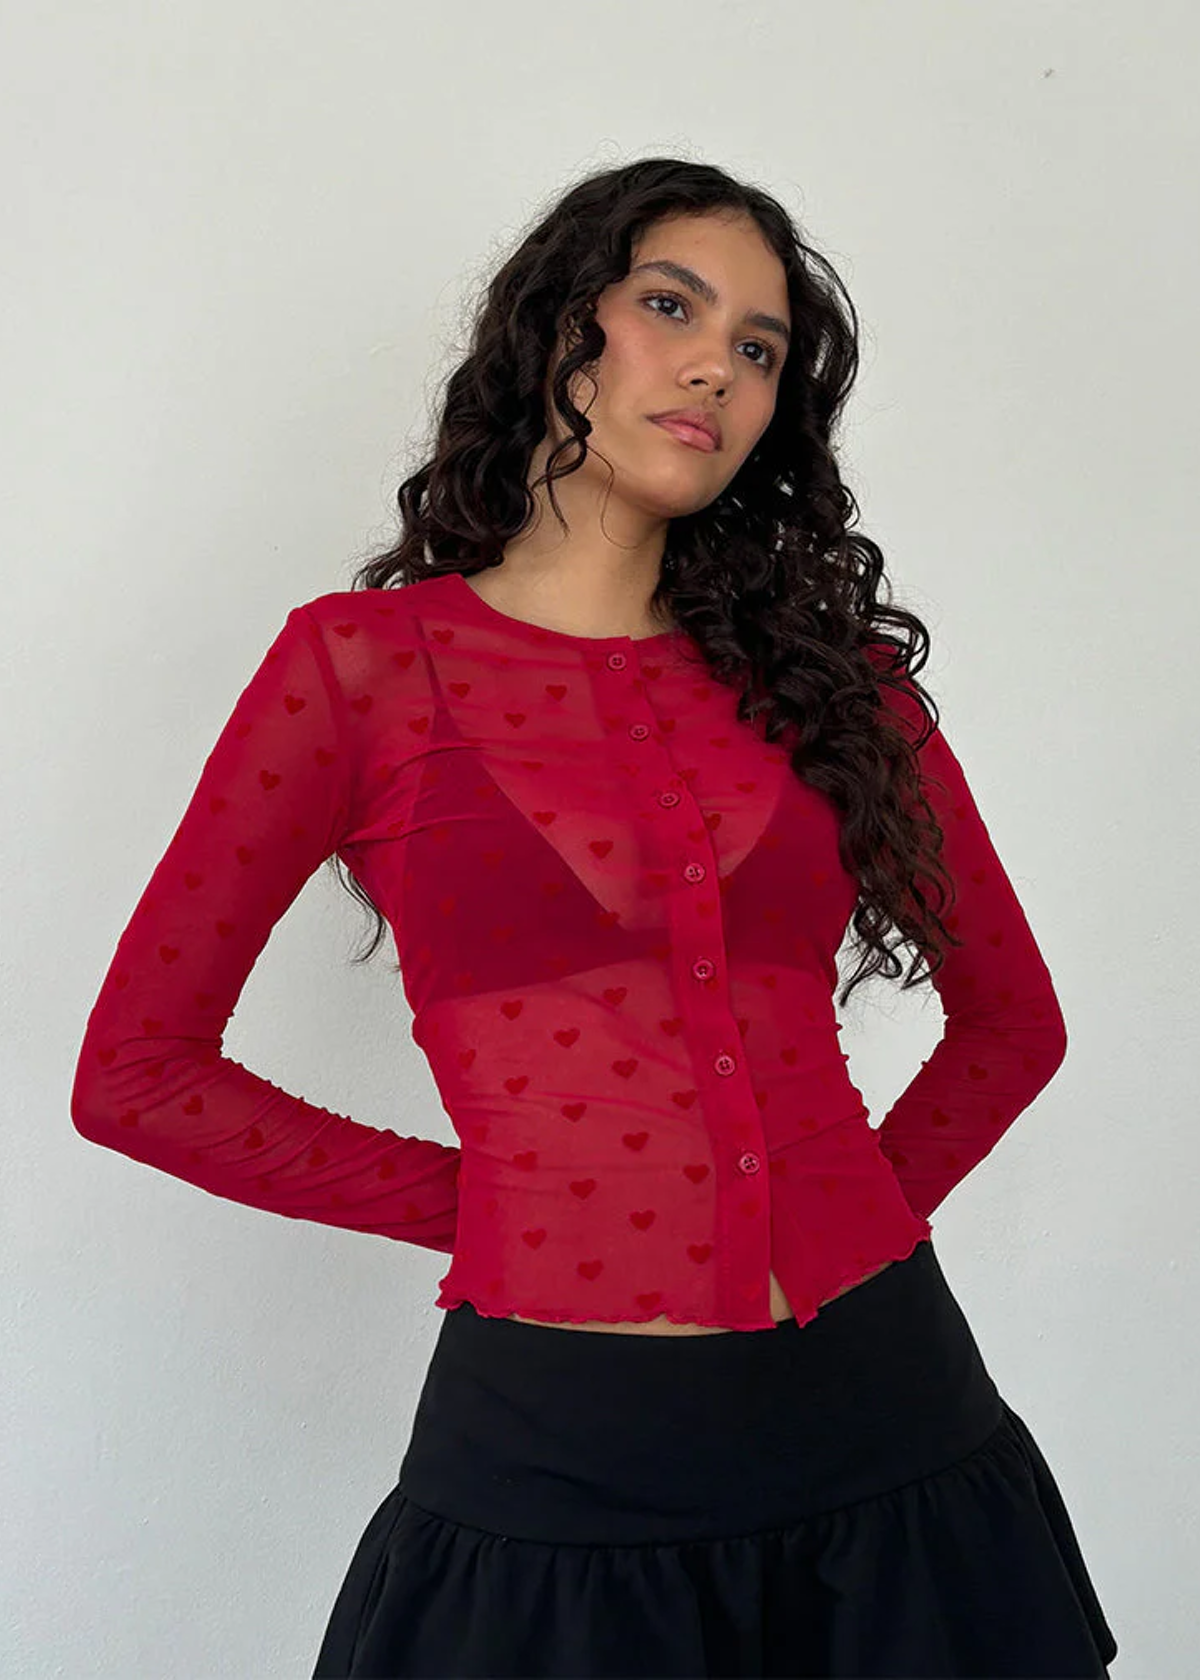 90s inspired Valentine deep red slinky mesh button front top with red flocked velvet hearts all over. Lettuce trim at cuffs and hem. By Motel Rocks